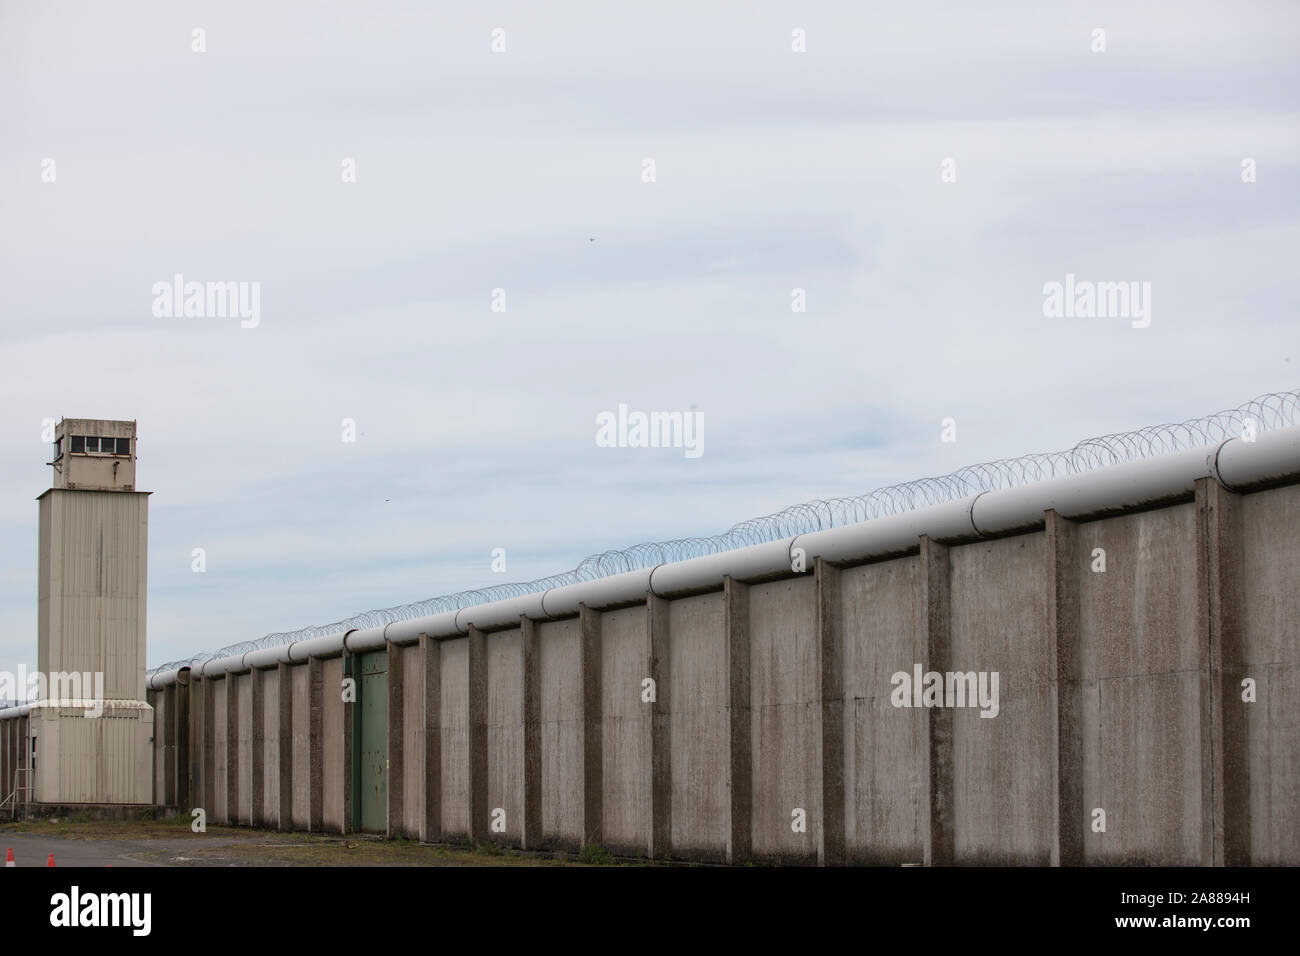 External walls of one of the H blocks in the former maze prison long kesh prison site, Northern Ireland Stock Photo